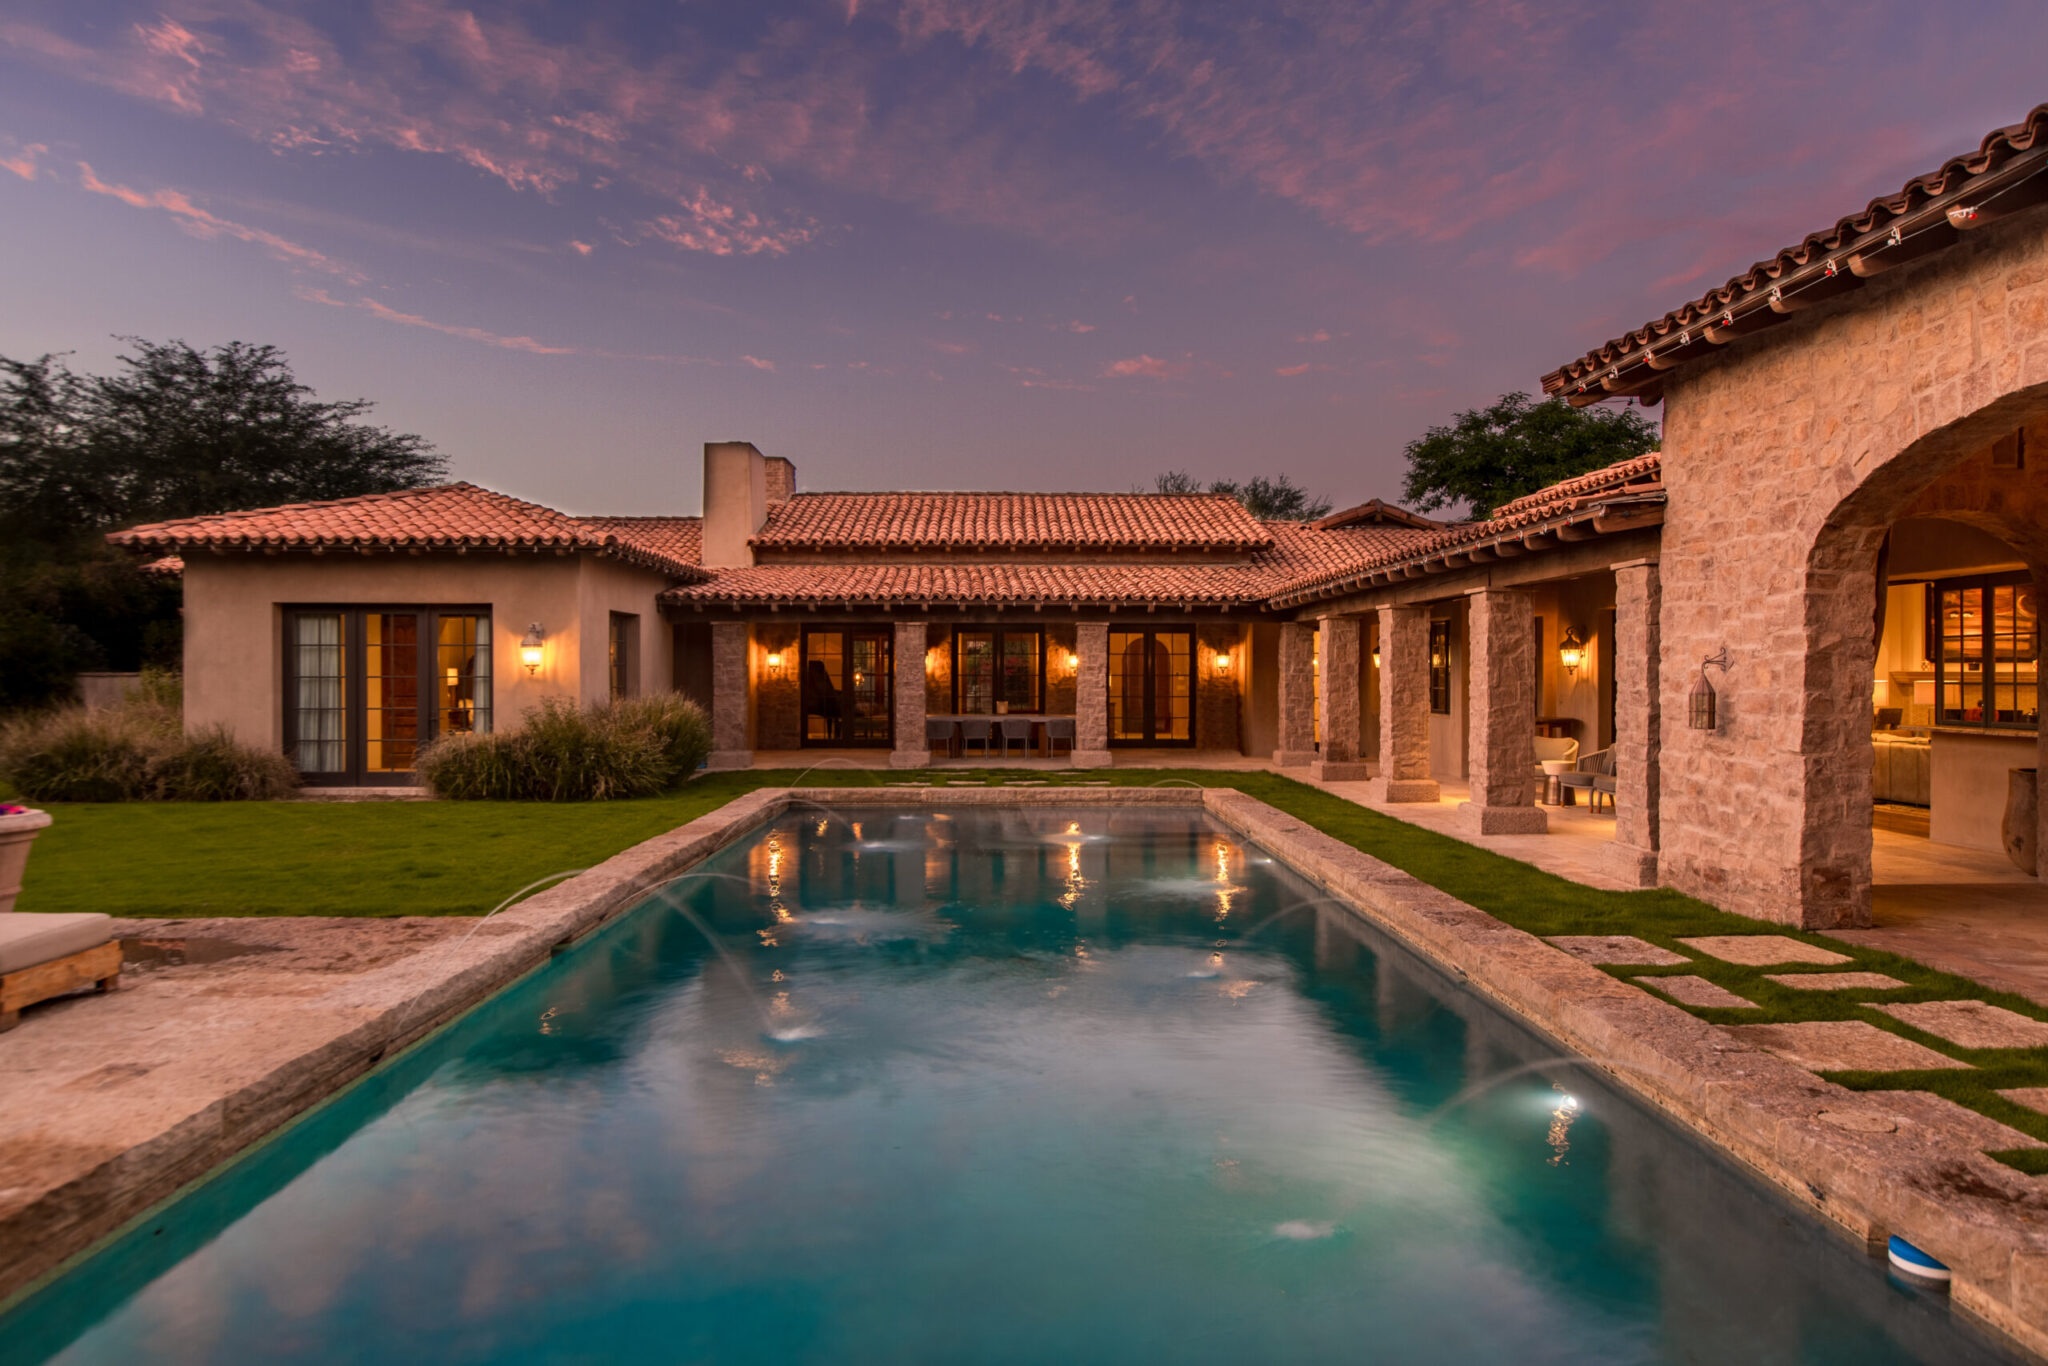 Sunset photo of pool for real estate listing in Phoenix, AZ